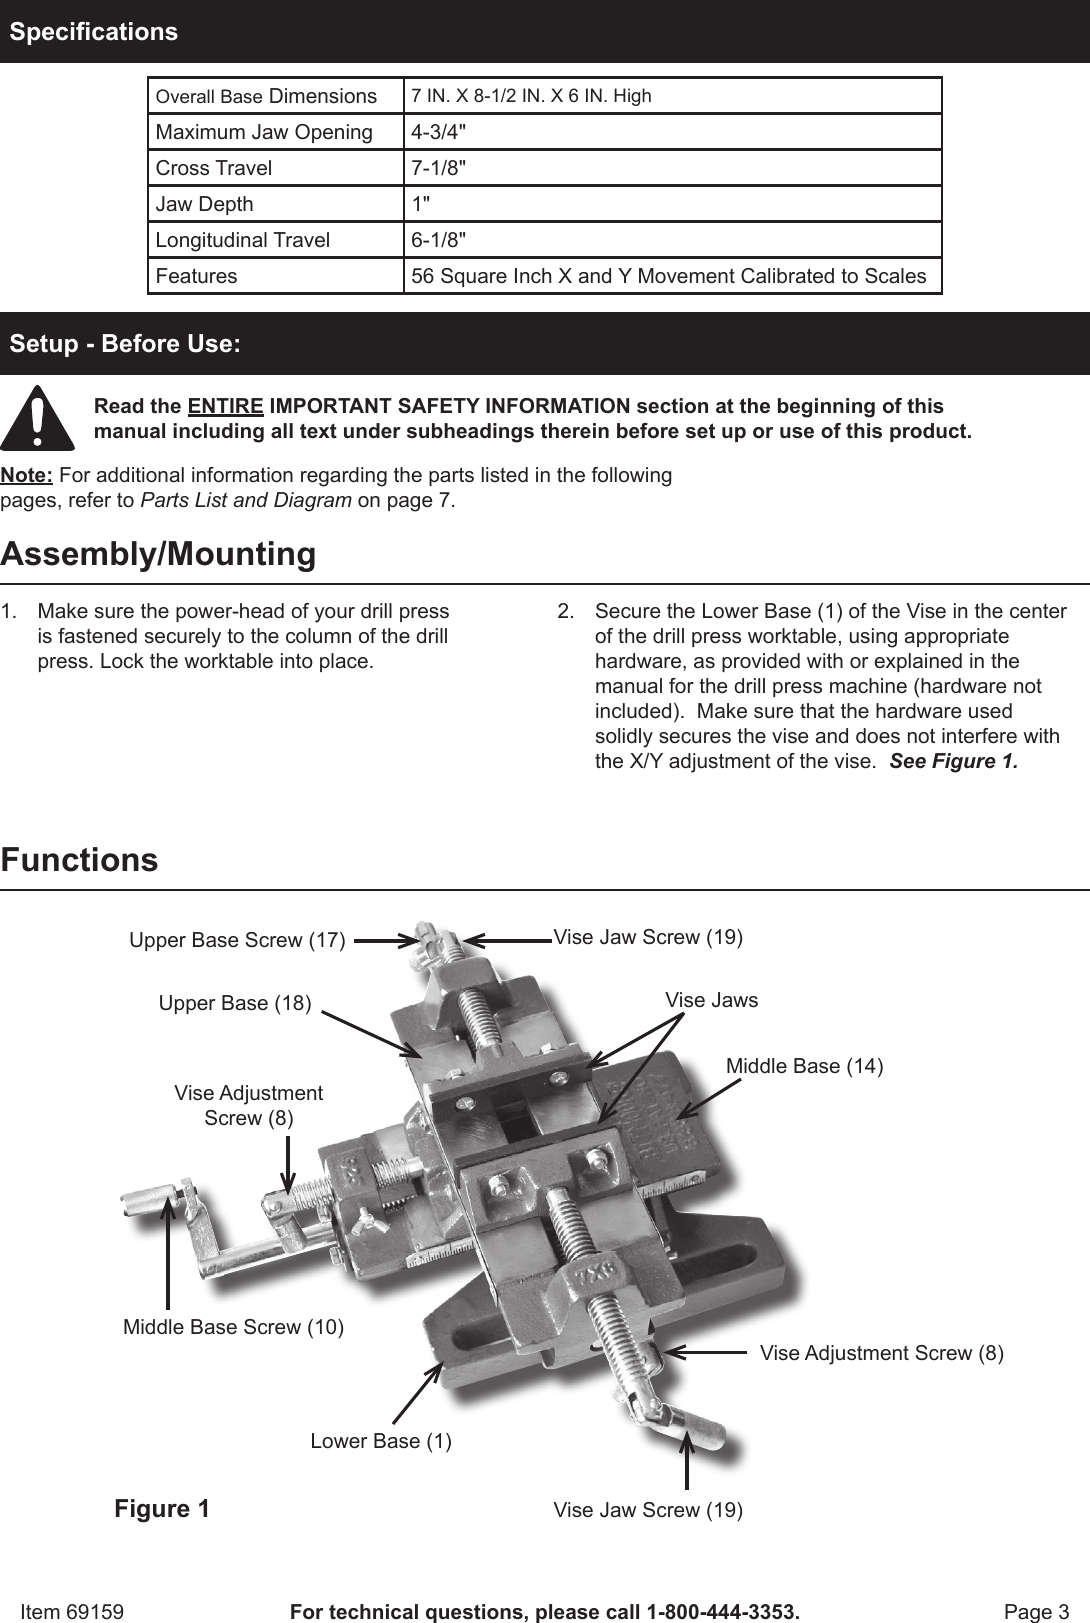 Page 3 of 8 - Harbor-Freight Harbor-Freight-5-In-Rugged-Cast-Iron-Drill-Press-Milling-Vise-Product-Manual-  Harbor-freight-5-in-rugged-cast-iron-drill-press-milling-vise-product-manual